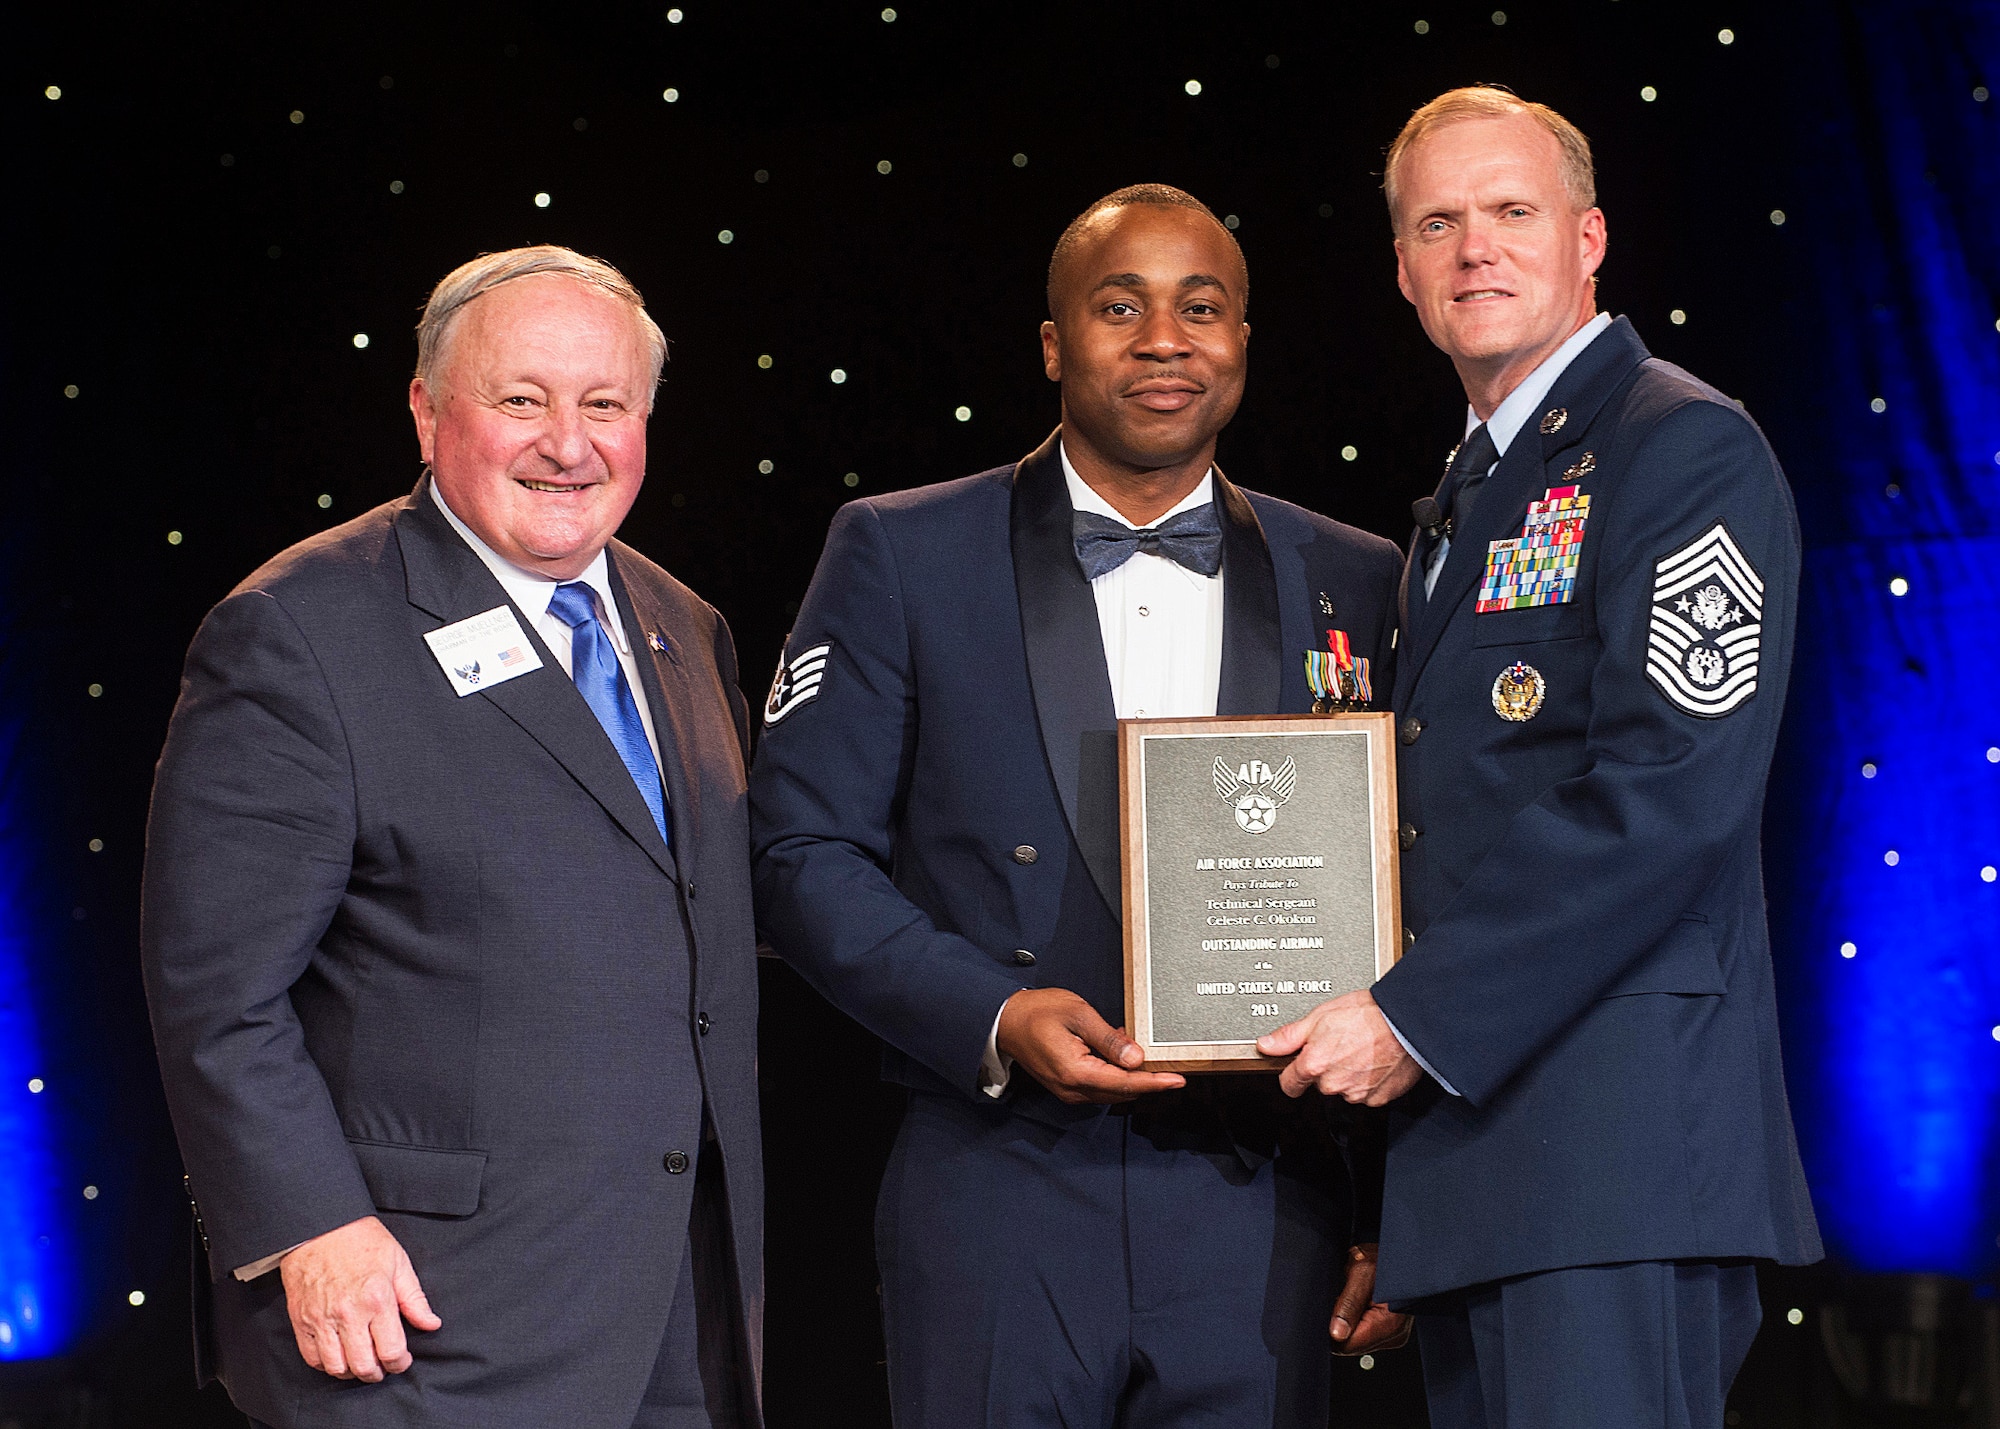 A Staff Sgt. accepts on behalf of Tech. Sgt. Celeste Okokon, who was recognized as one of a 12 Outstanding Airmen of the Year at a reception and awards dinner hosted by the Air Force Association during the AFA's annual Air & Space Conference and Technology Exposition Sept. 16, 2013, in Washington, D.C. The OAY award recognizes the top 12 outstanding enlisted Airmen for superior leadership, job performance, community involvement and personal achievements. Okokon is a dental hygienist with the 7th Bomb Wing at Dyess Air Force Base, Texas. (U.S. Air Force photo/Jim Varhegyi)